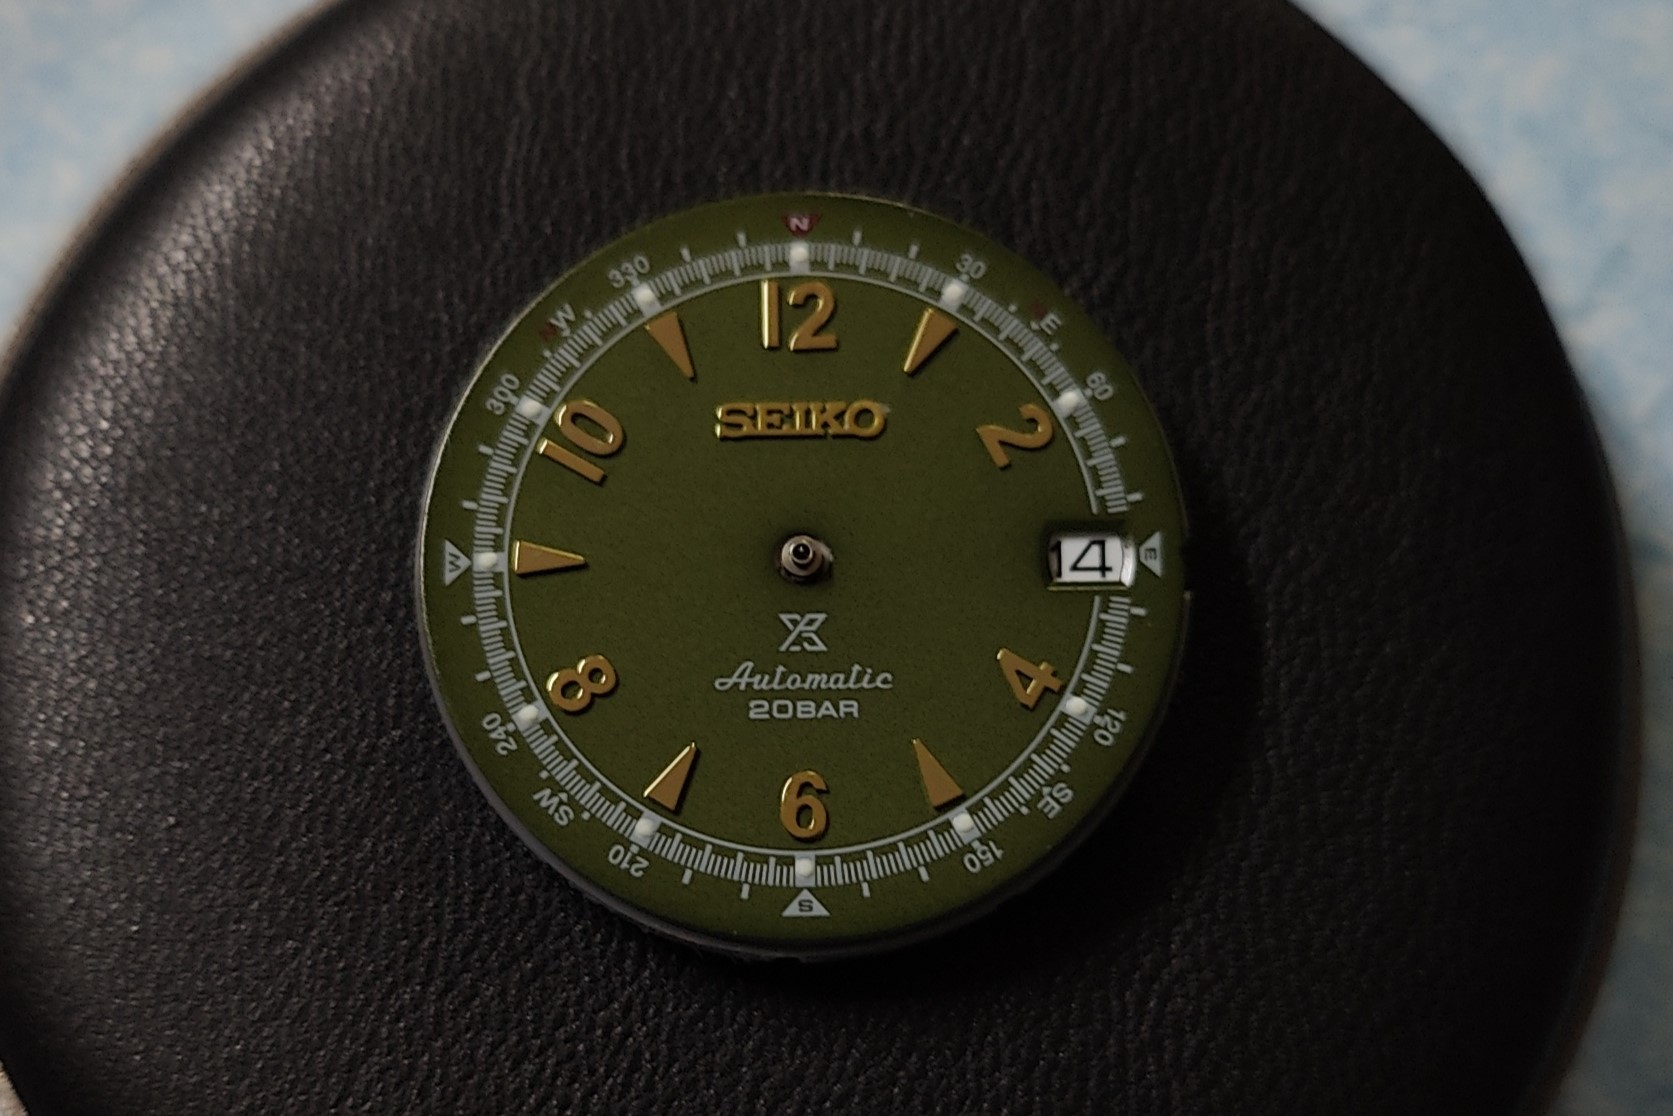 Test fitting the dial onto the movement